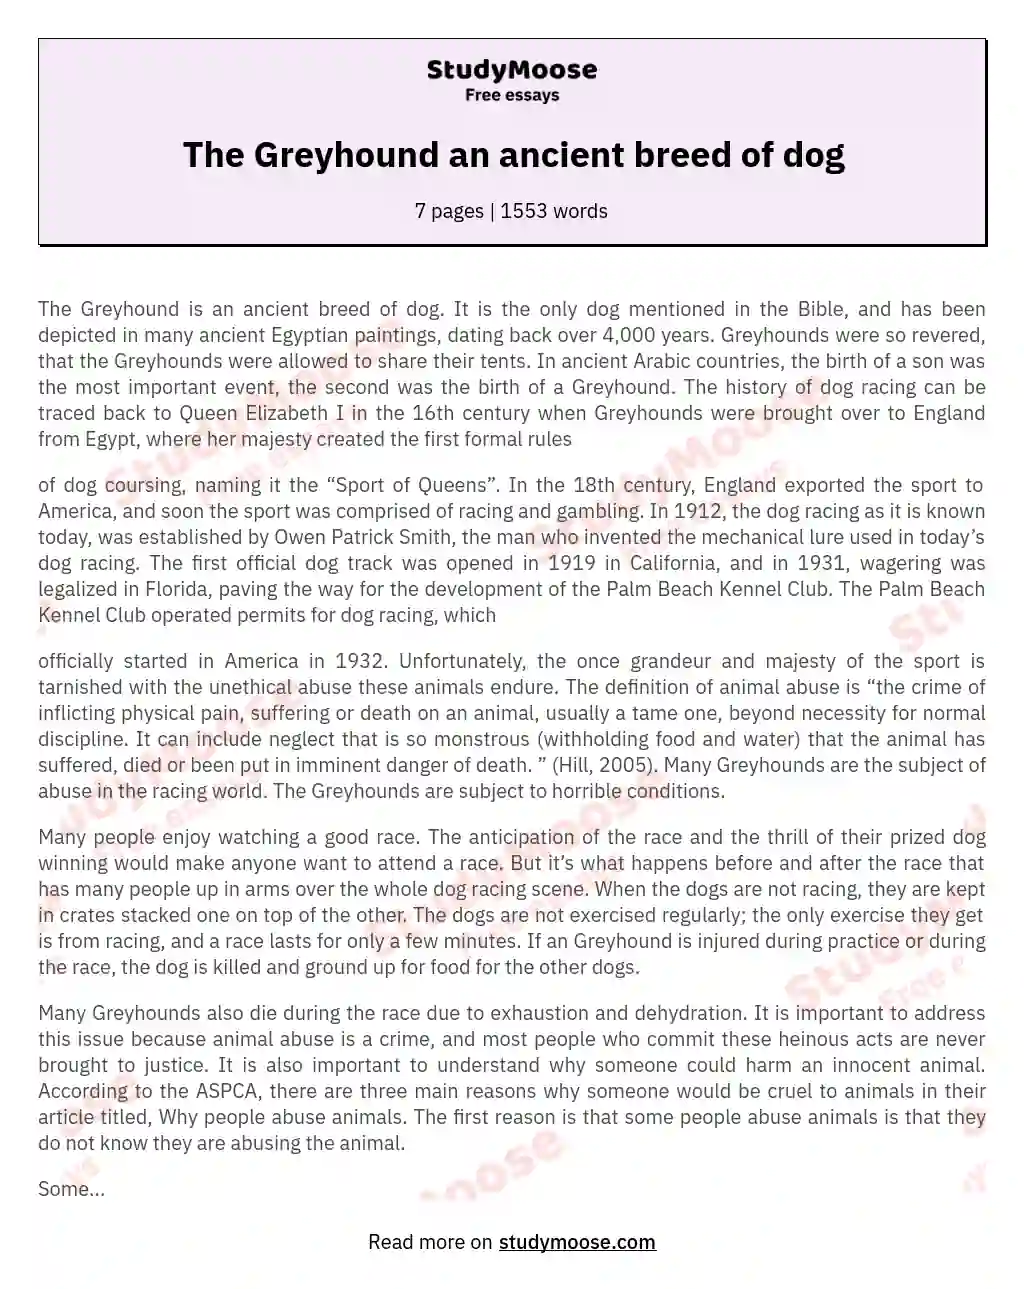 The Greyhound an ancient breed of dog essay